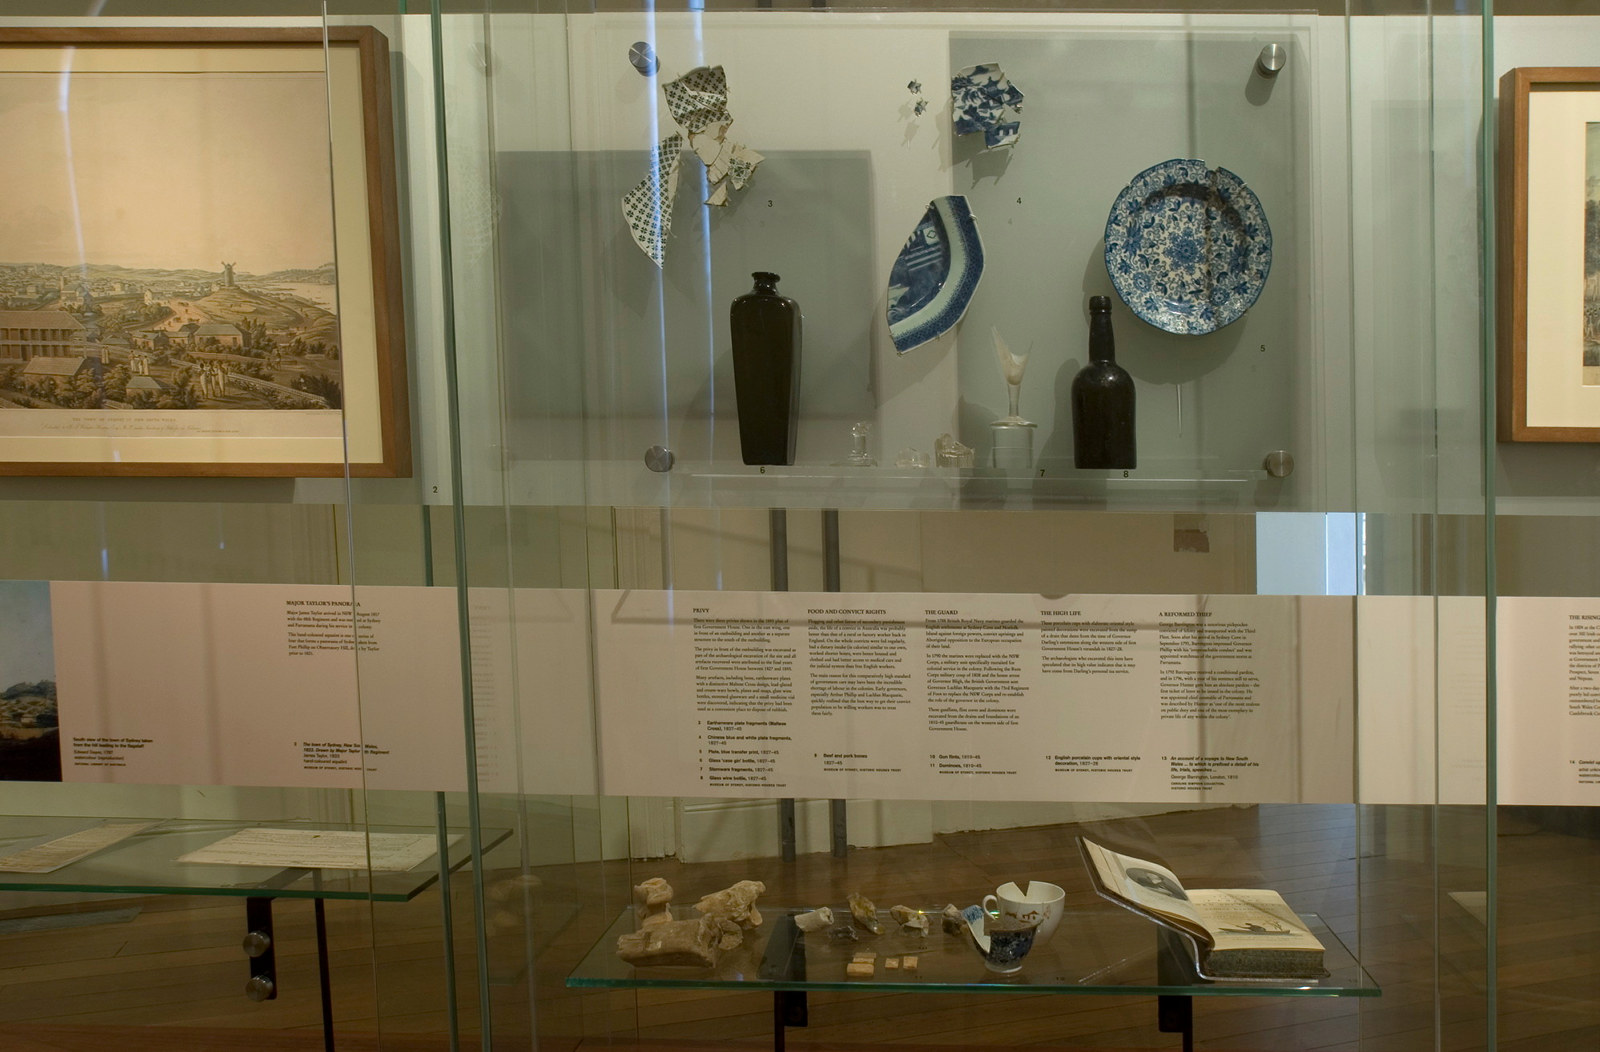 Documentation of Convicts: sites of punishment exhibition showing ceramics and glassware